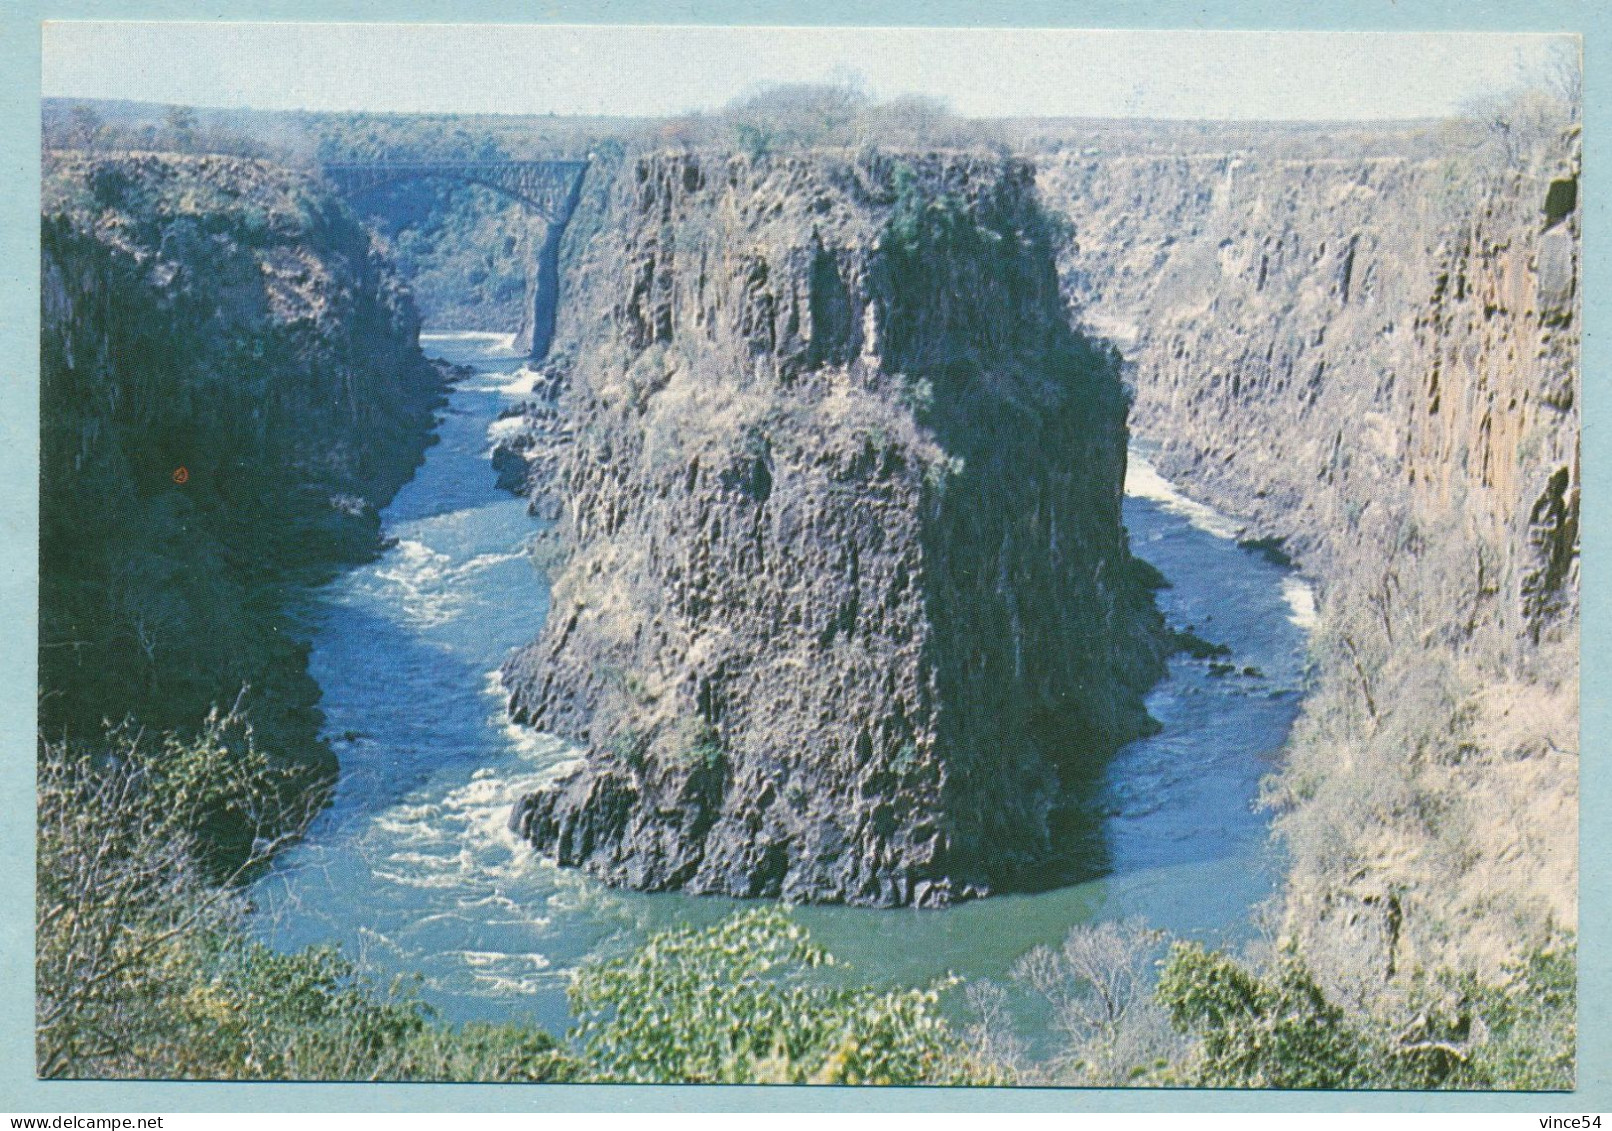 Showing The First And Second Gorge Below The Victoria Falls - Rhodesia - Simbabwe